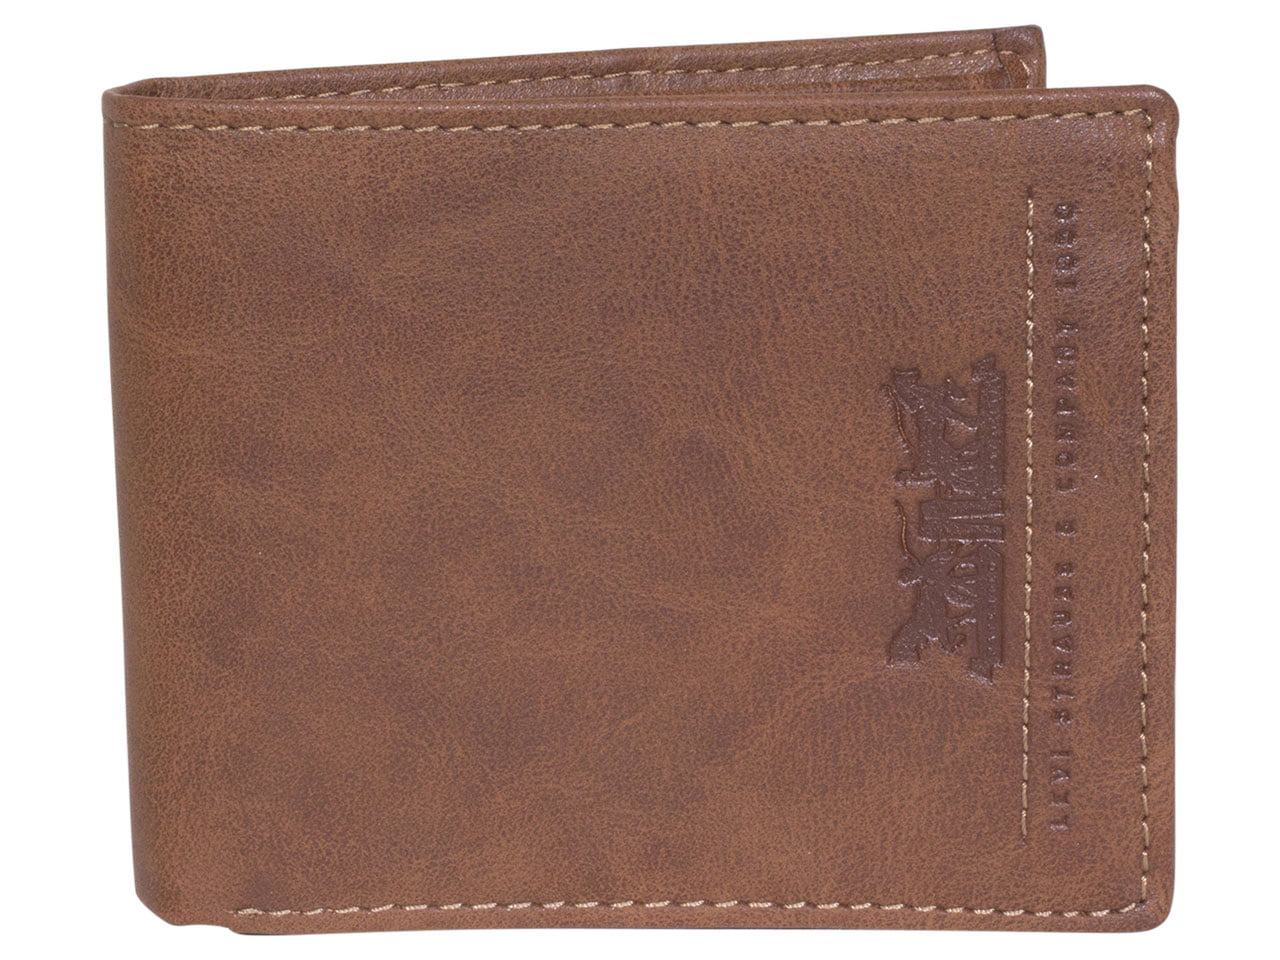 Ariat Western Mens Wallet Rodeo Leather Shield Dark Copper A35118283 